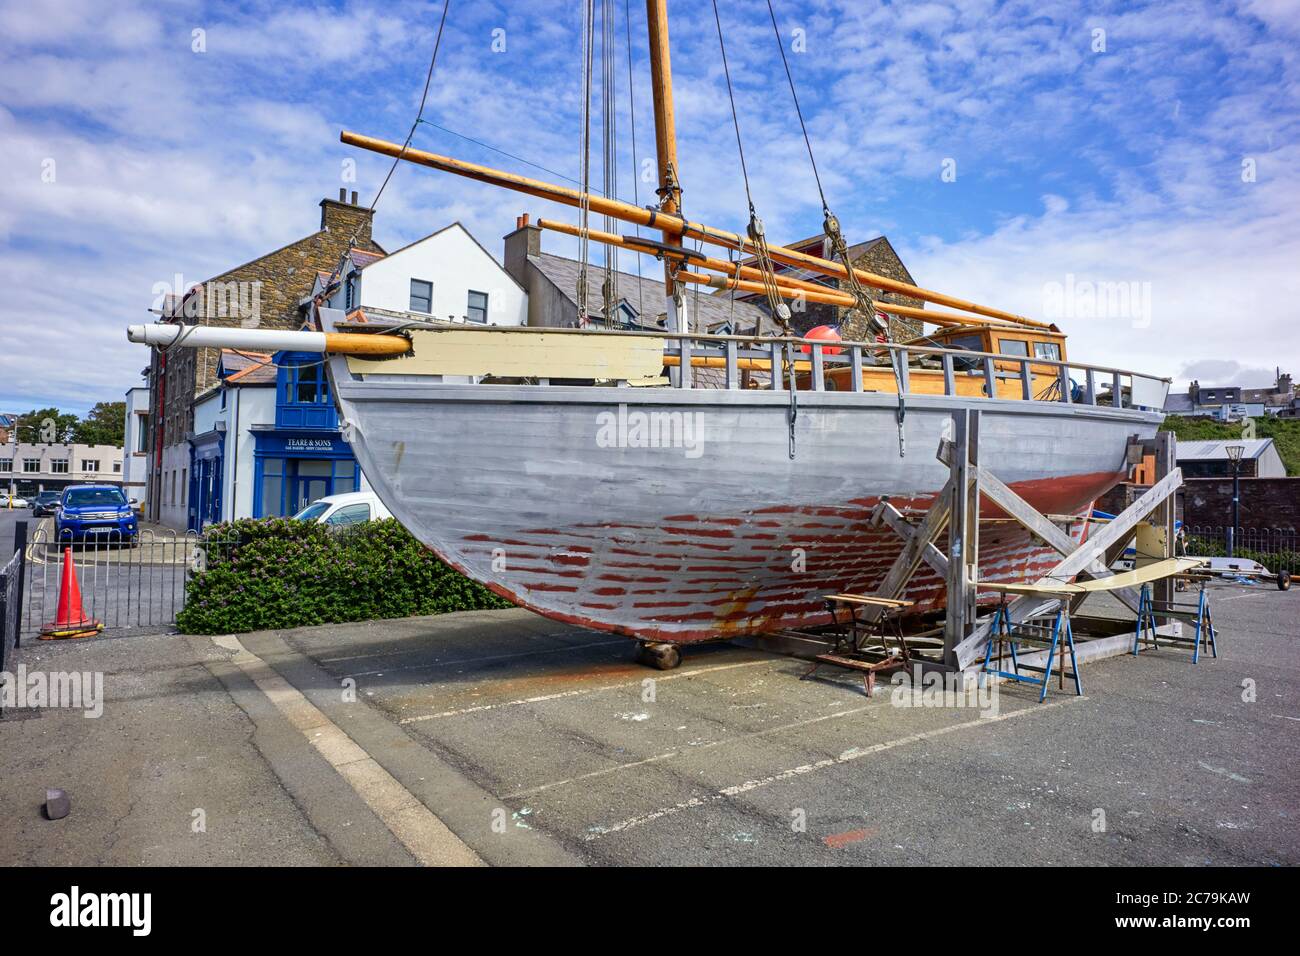 Manx Nobby sailing boat White Heather undergoing repairs on the quayside at Peel harbour in Isle of Man Stock Photo